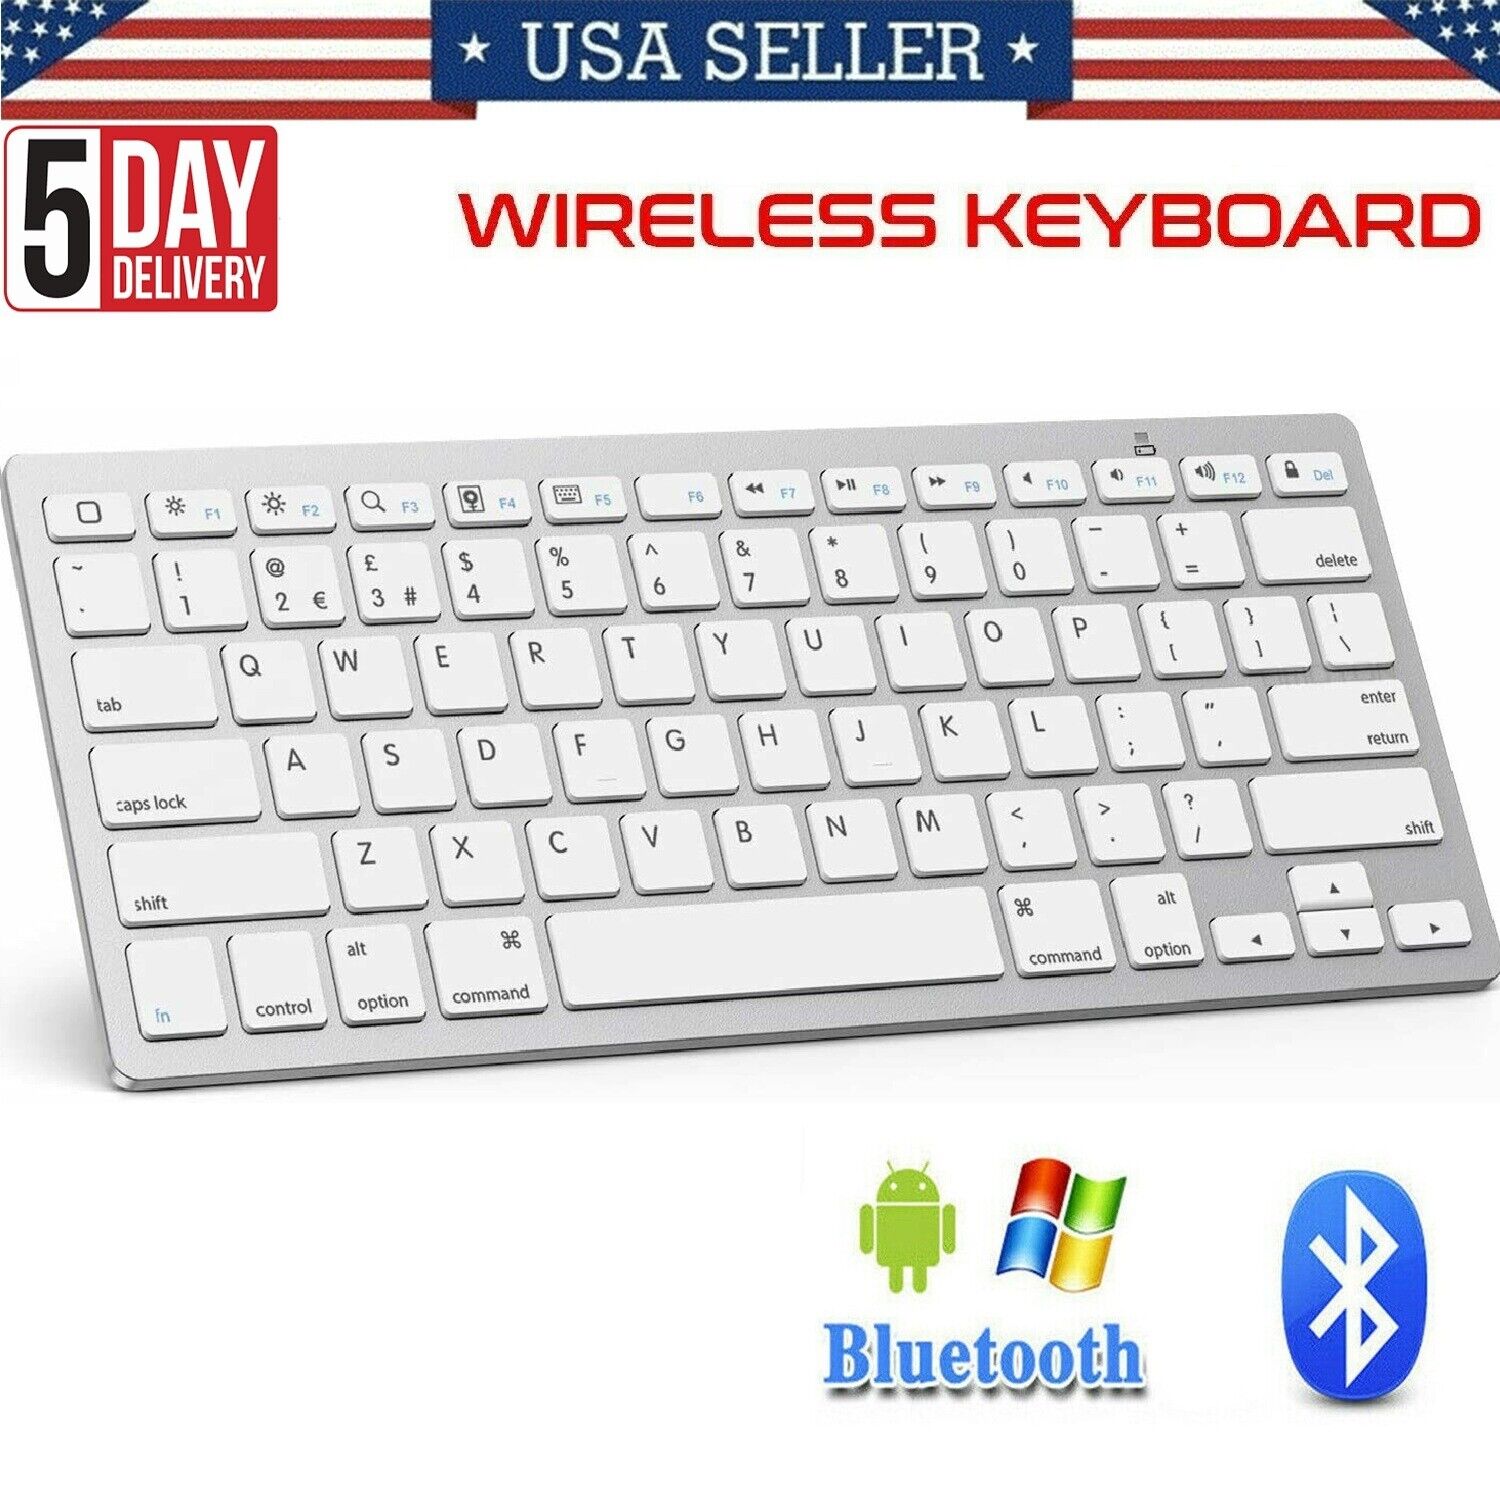 Ultra Slim Wireless Bluetooth 3.0 Keyboard For iMac iPad Android Phone Tablet PC